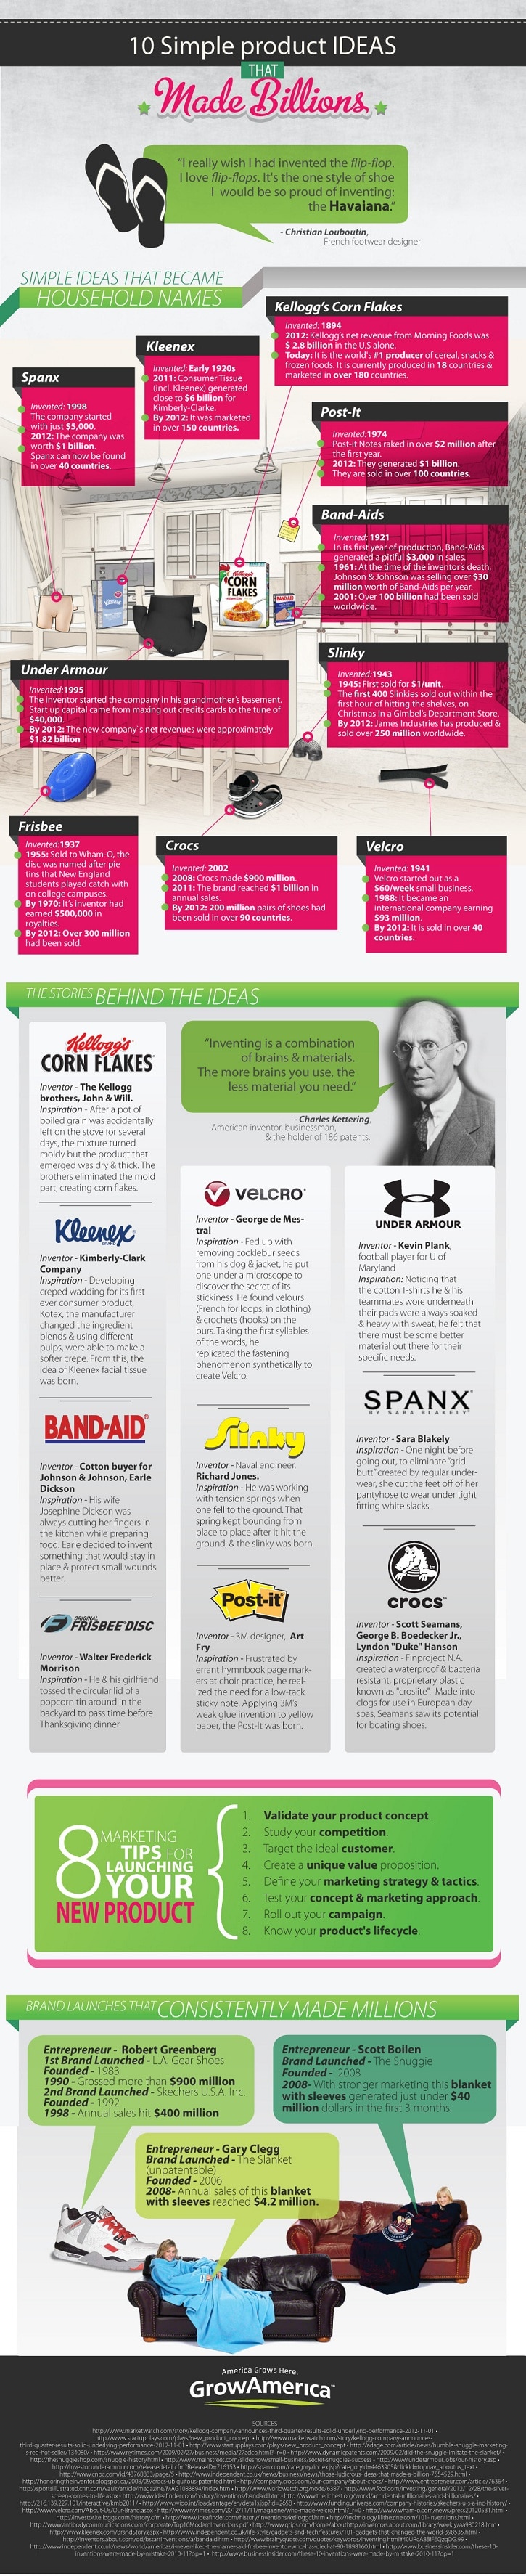 10 Really Simple Product Ideas That Made Billions [Infographic]